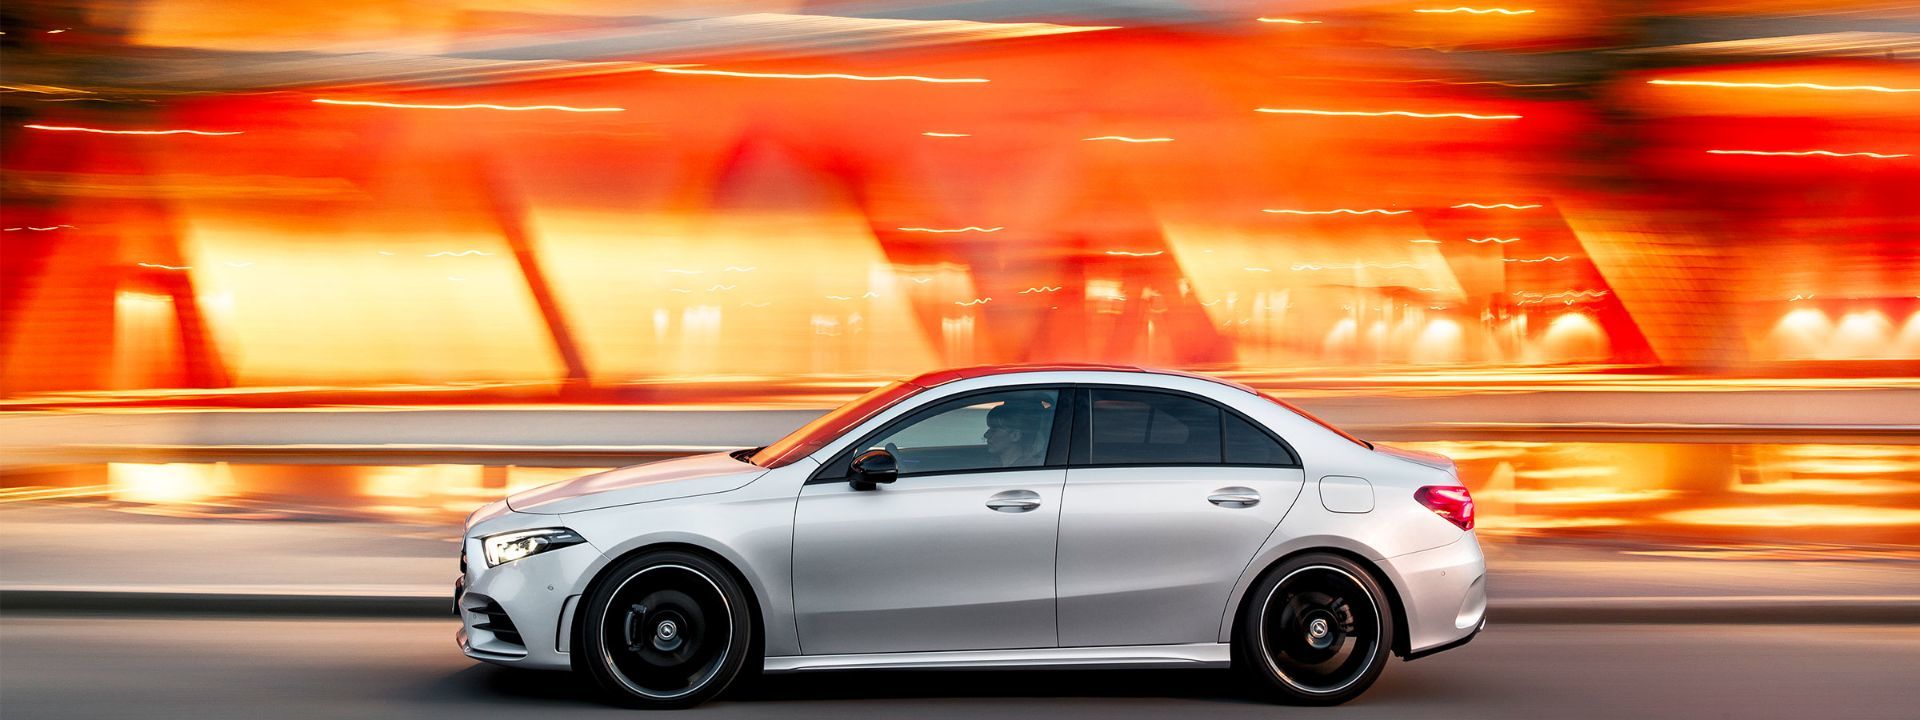 Everything you need to know about the 2019 Mercedes-Benz A-Class